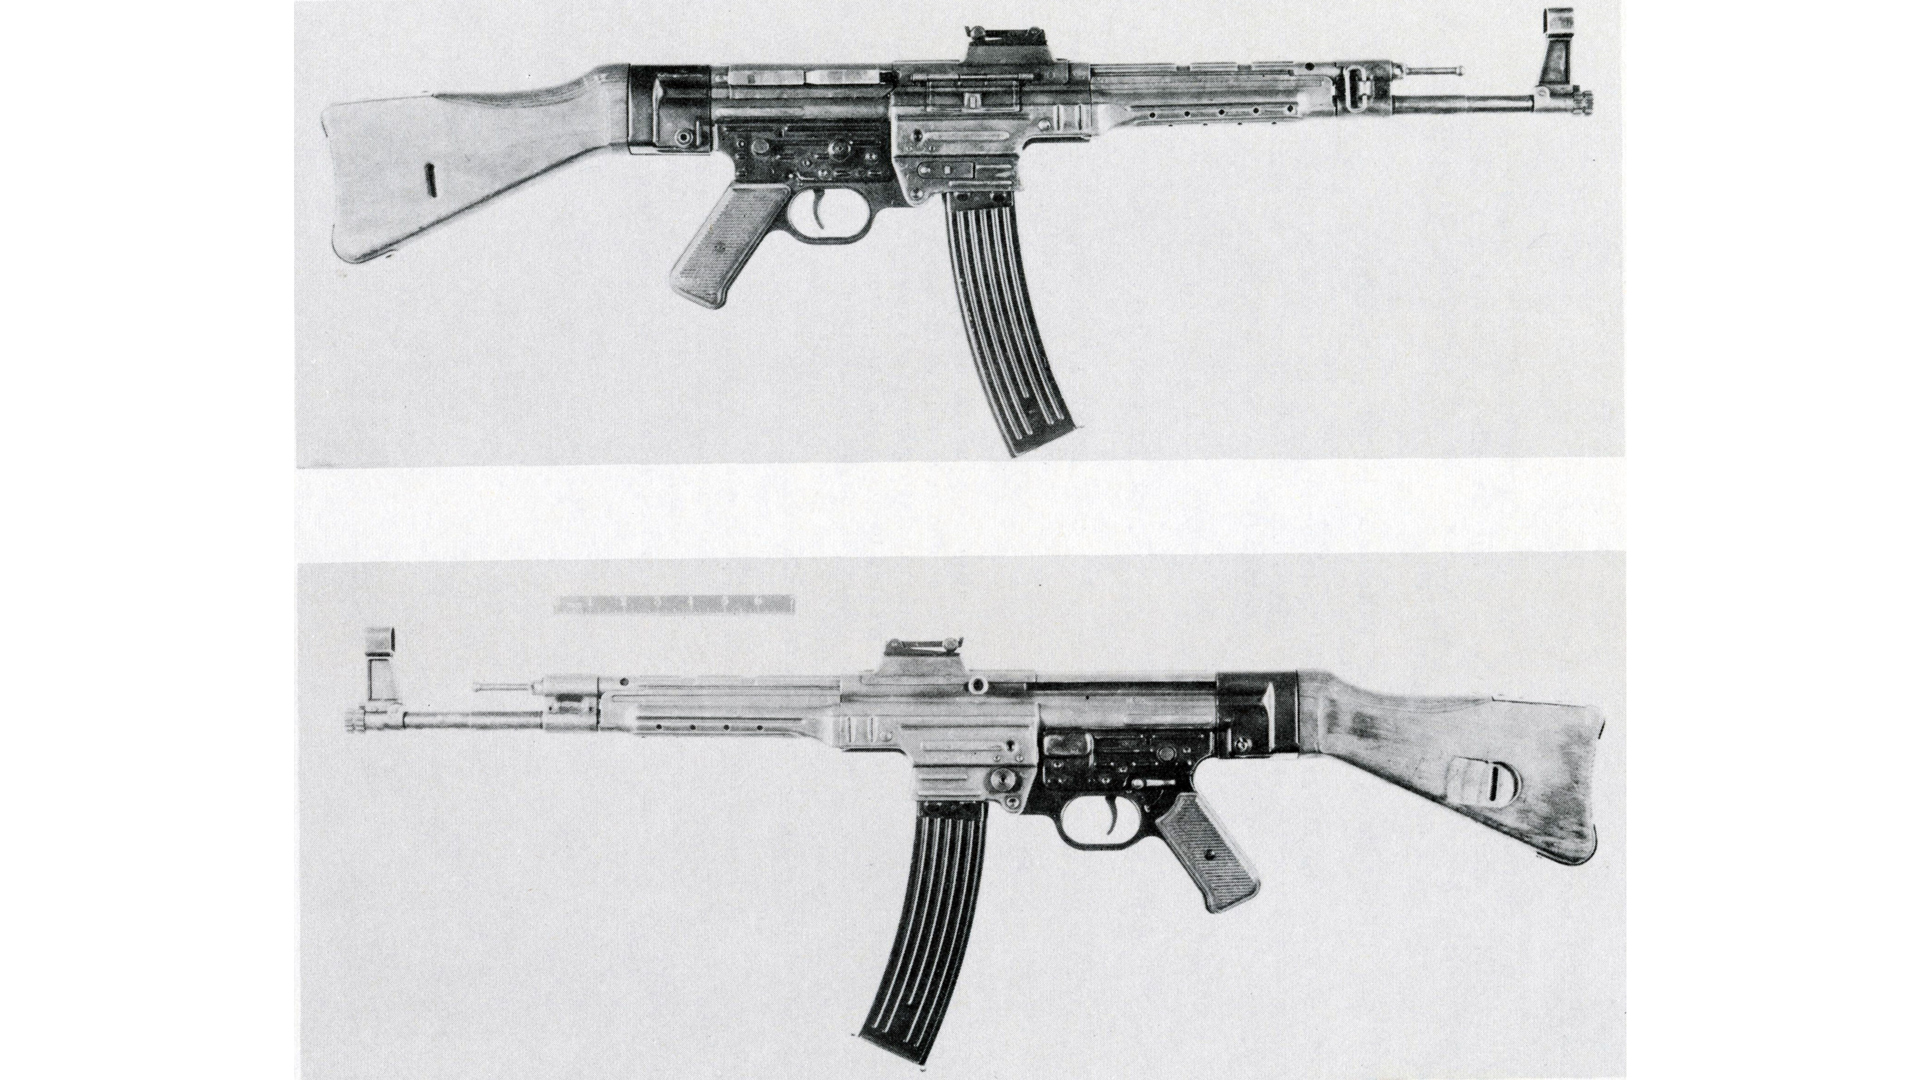 U.S. Ordnance images of a “MP43” used in a postwar review. Photo courtesy of author’s collection.